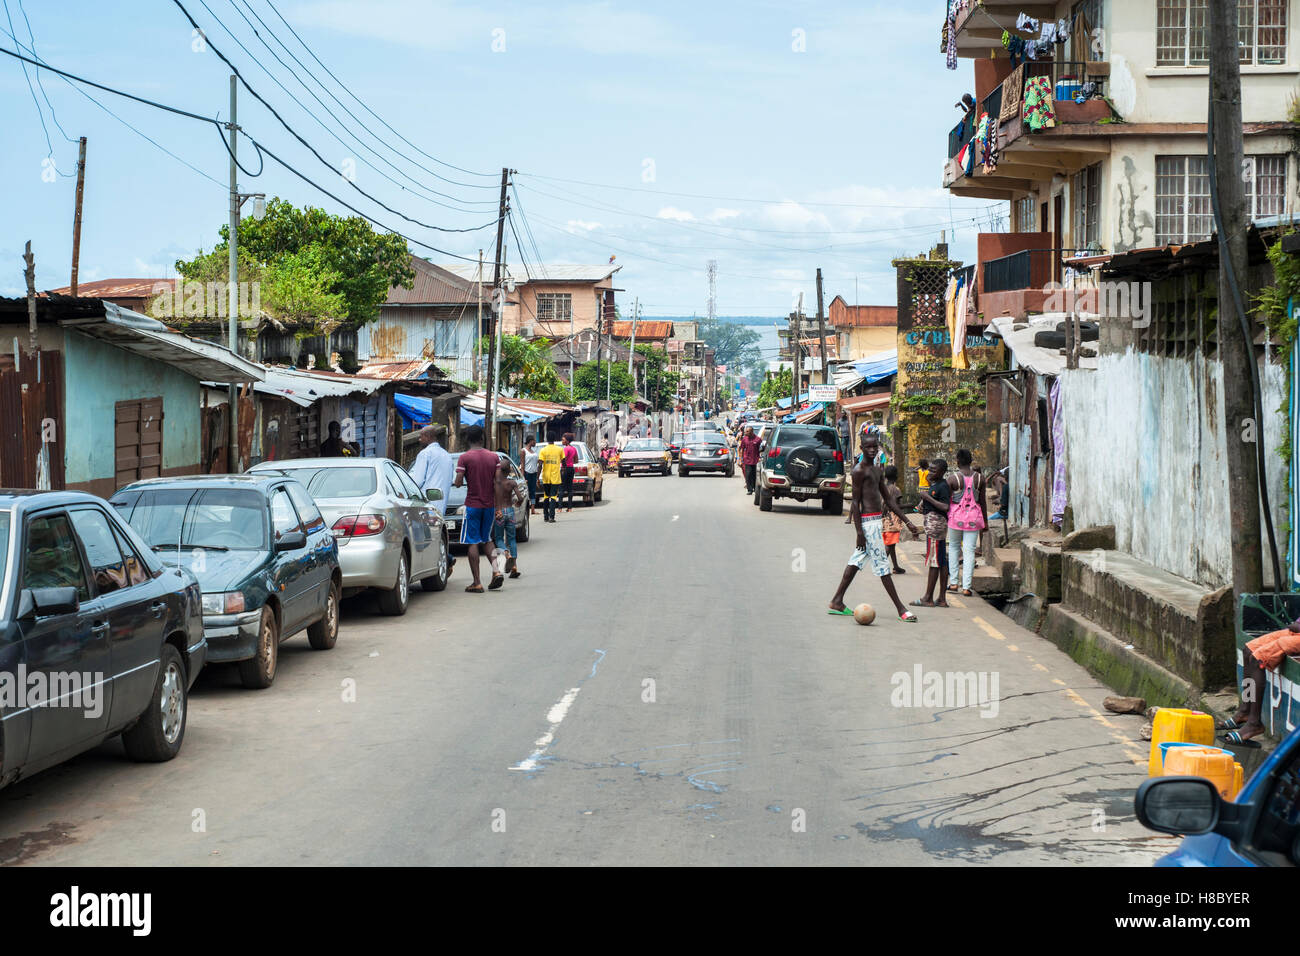 A busy street in Freetown with pedestrians, parked vehicles and buildings Stock Photo